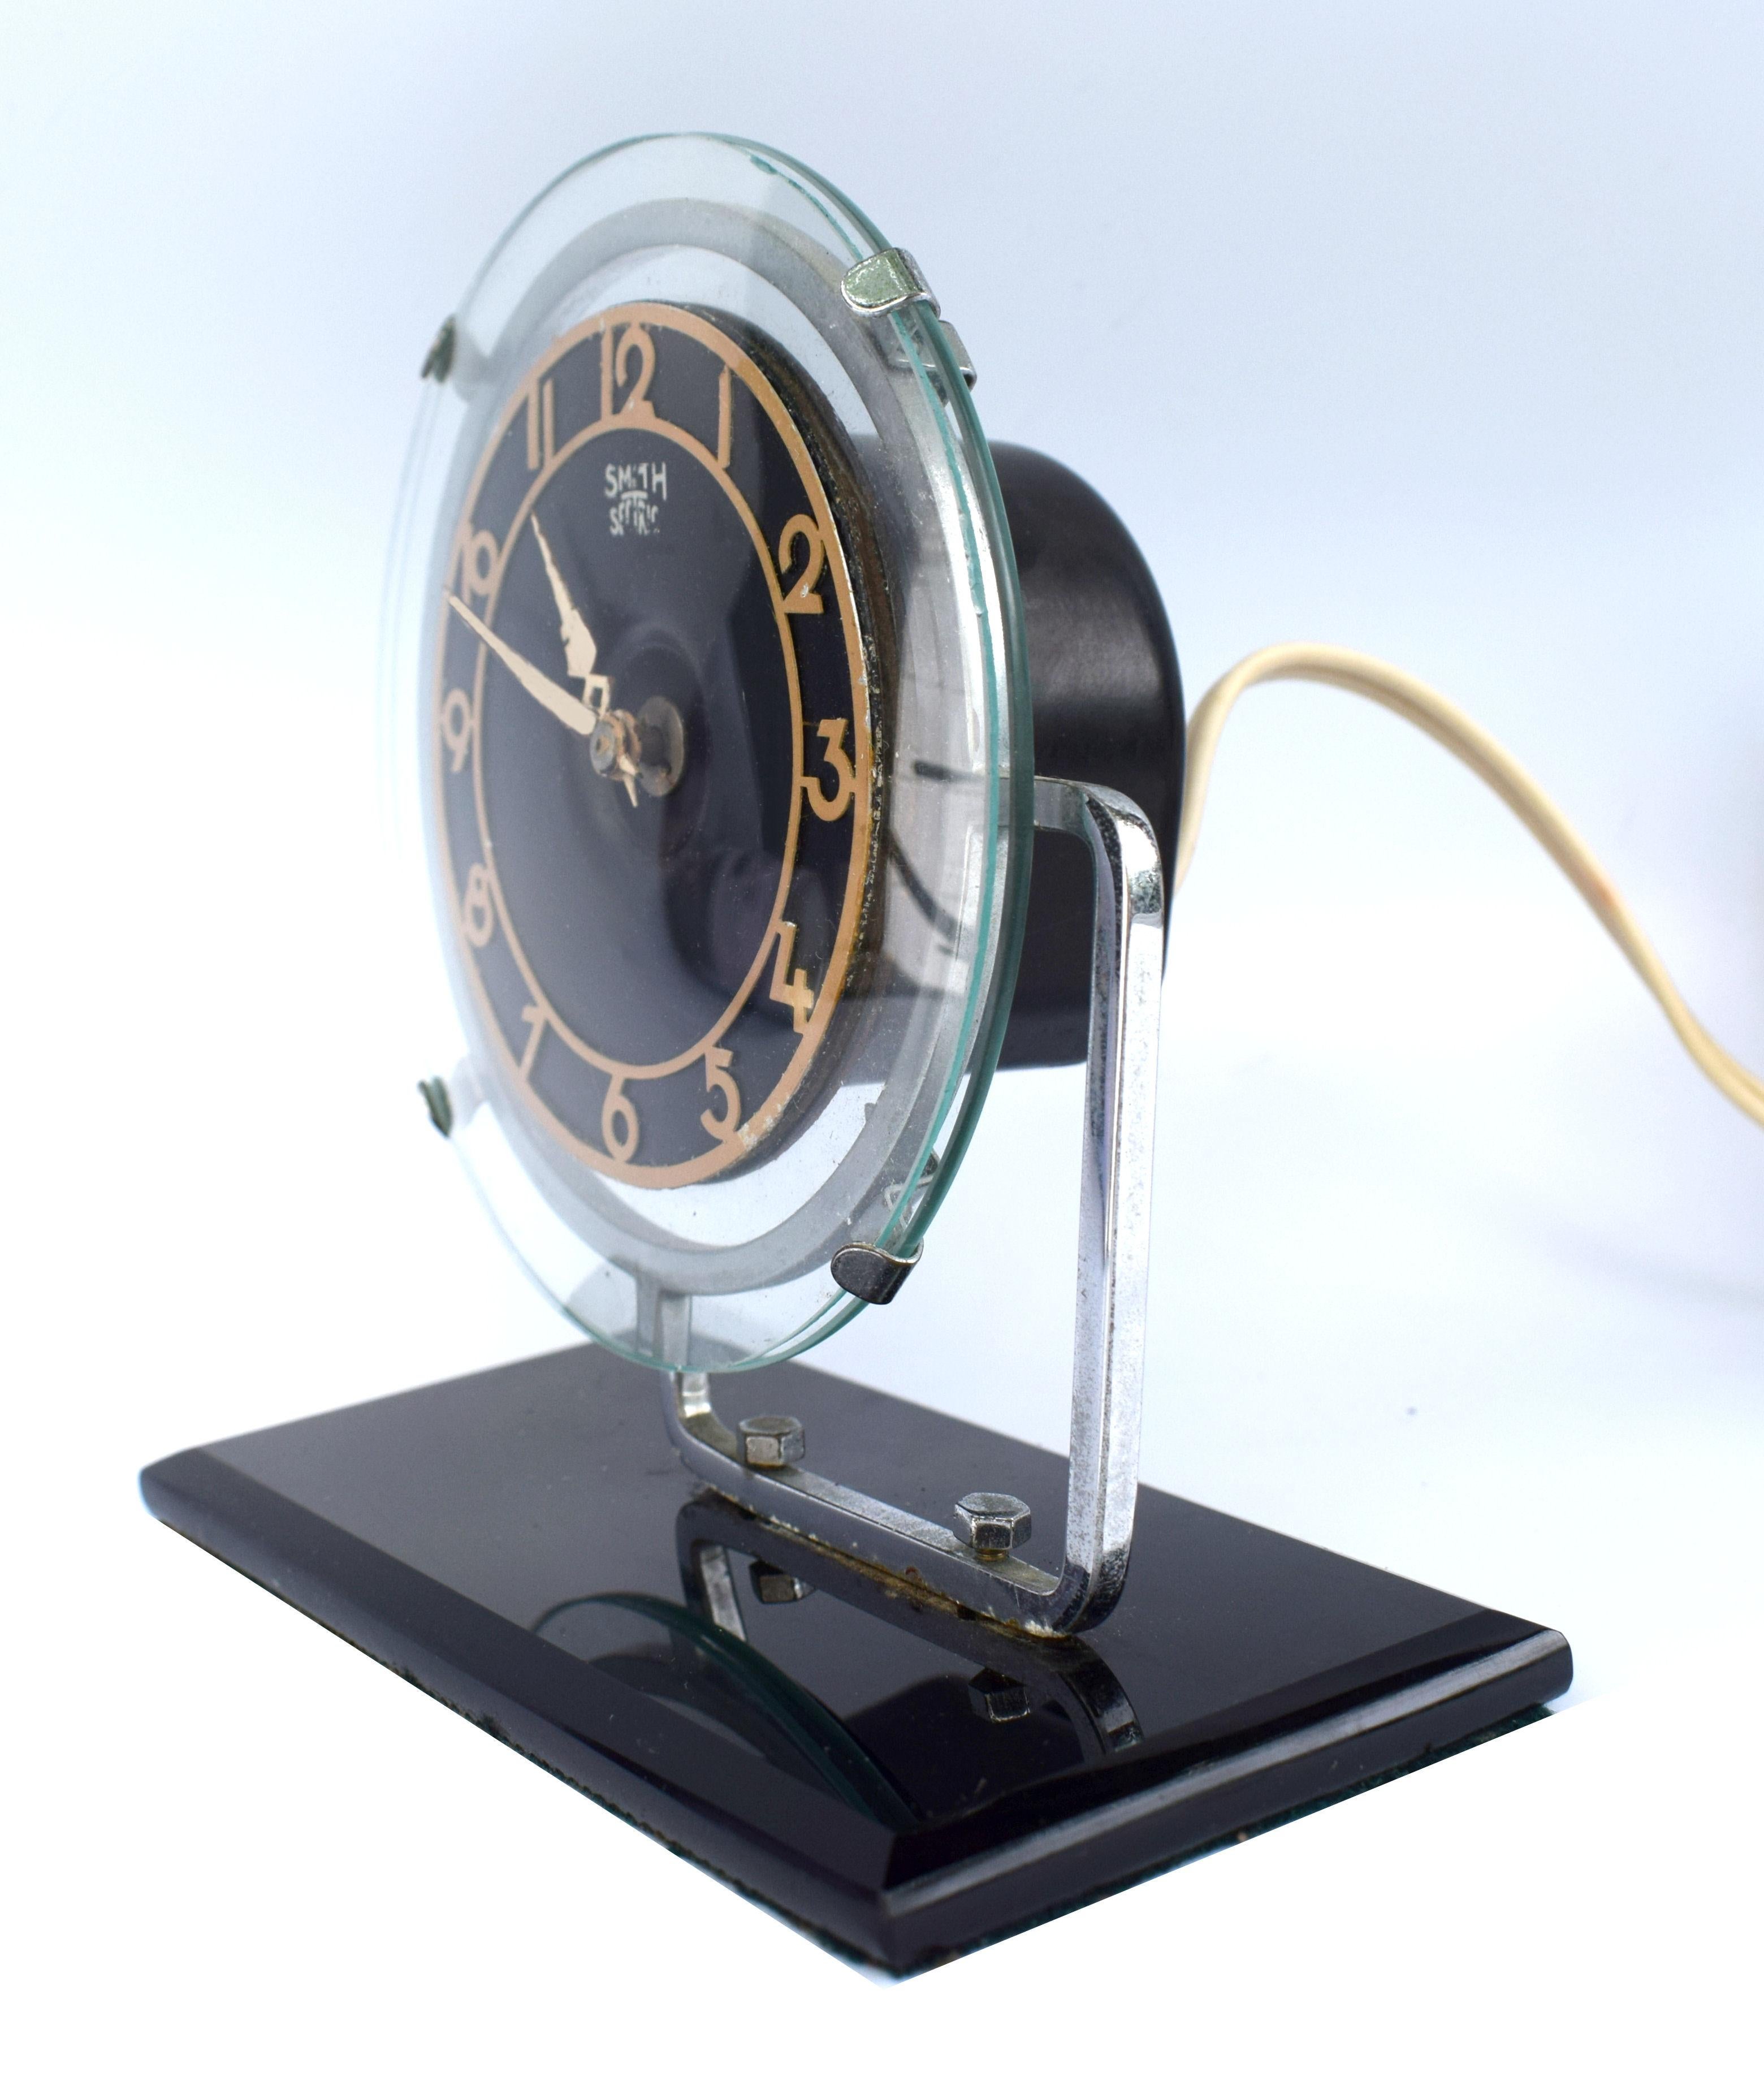 Quite a rare model, modernist 1930s Art Deco clock by English makers Smiths GEC, runs on electric, so plug in and go! Black vitrolite (compressed glass) with chrome bezel and black enameled fretted out numerals. The movement is encased in a Bakelite